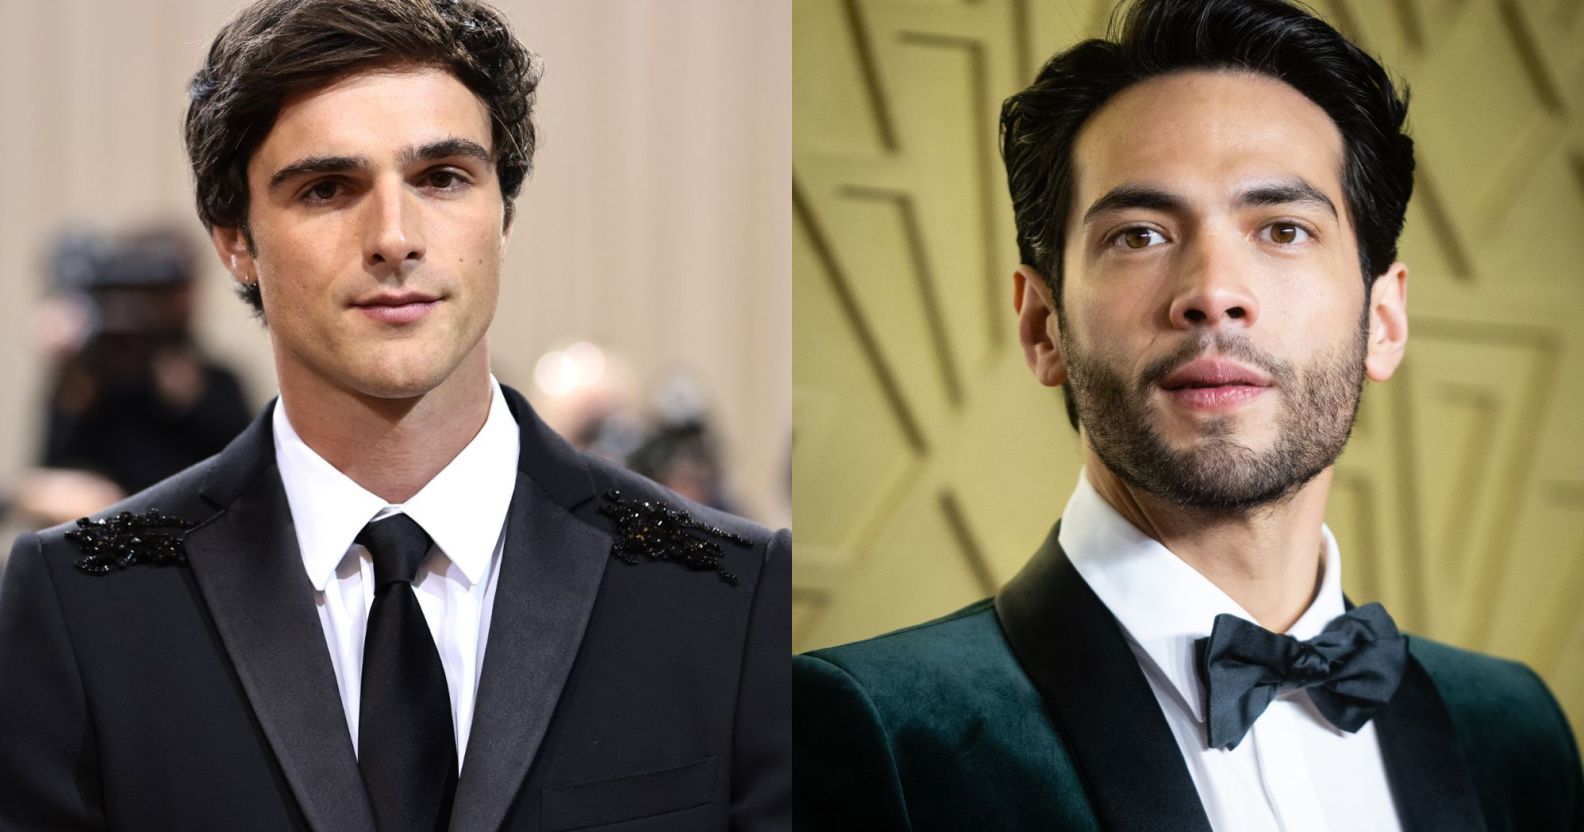 Side by side images of Jacob Elordi wearing a black suit and tie and Diego Calva wearing a black suit and bow tie